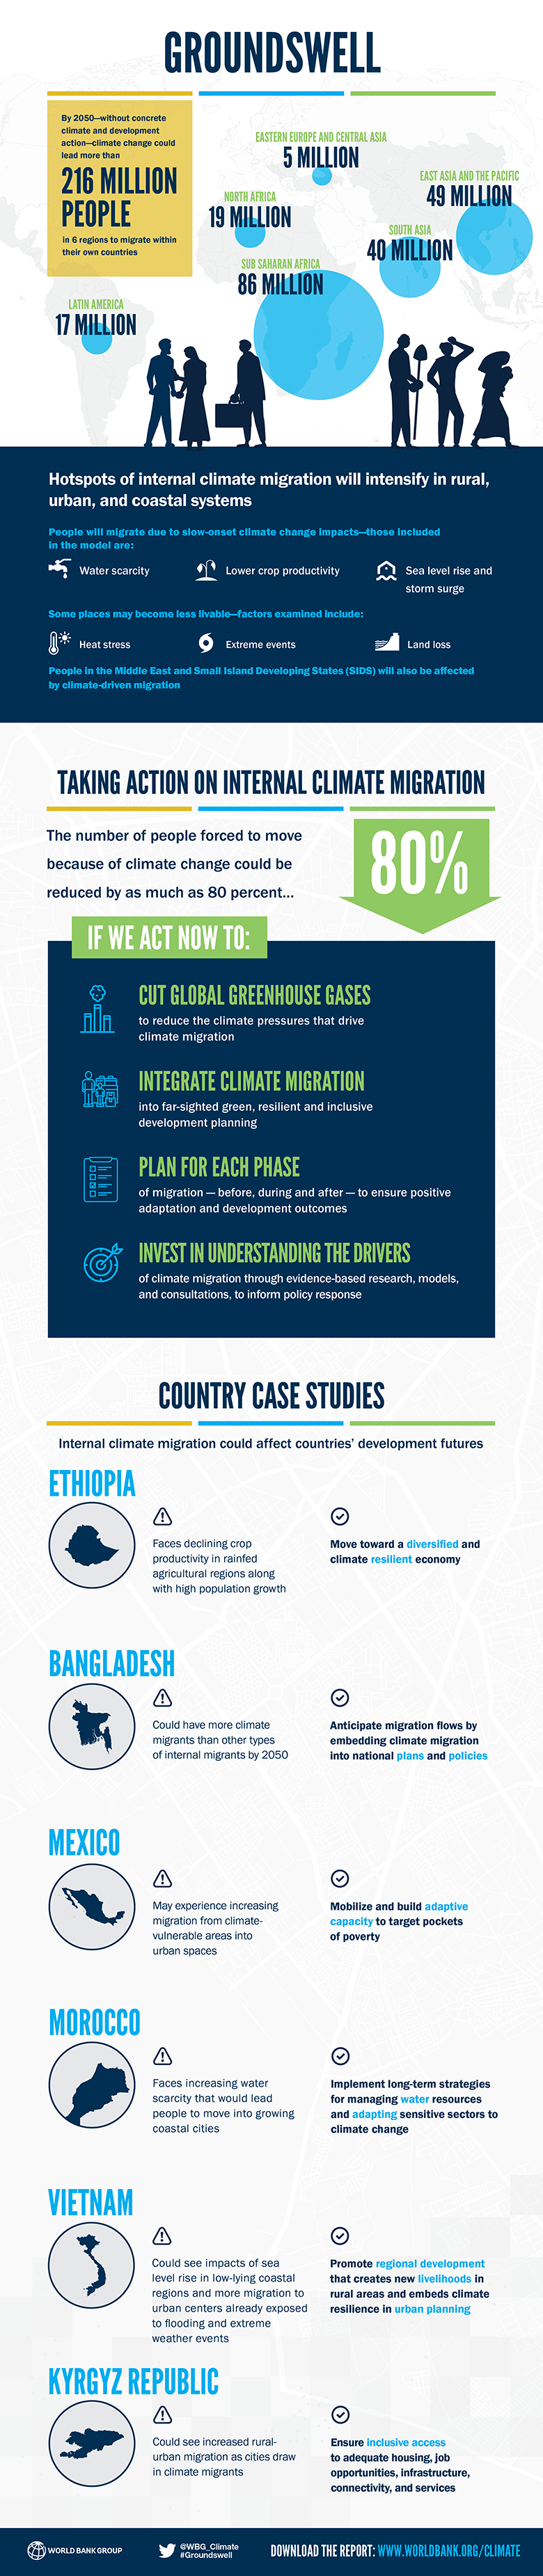 Groundswell report infographic